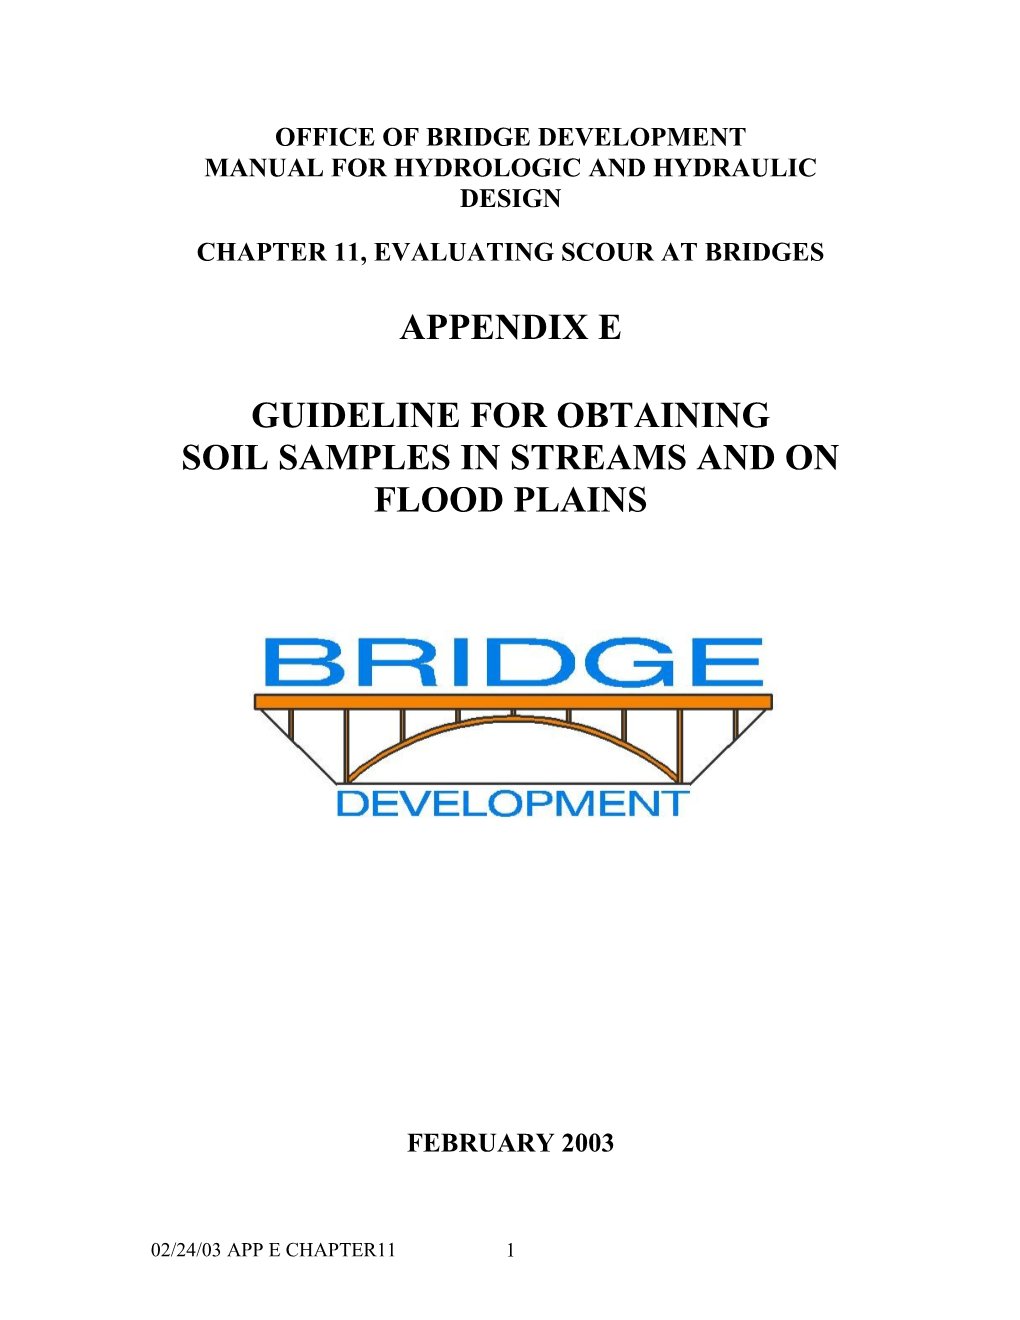 Field Information On Soils Requried For The Application